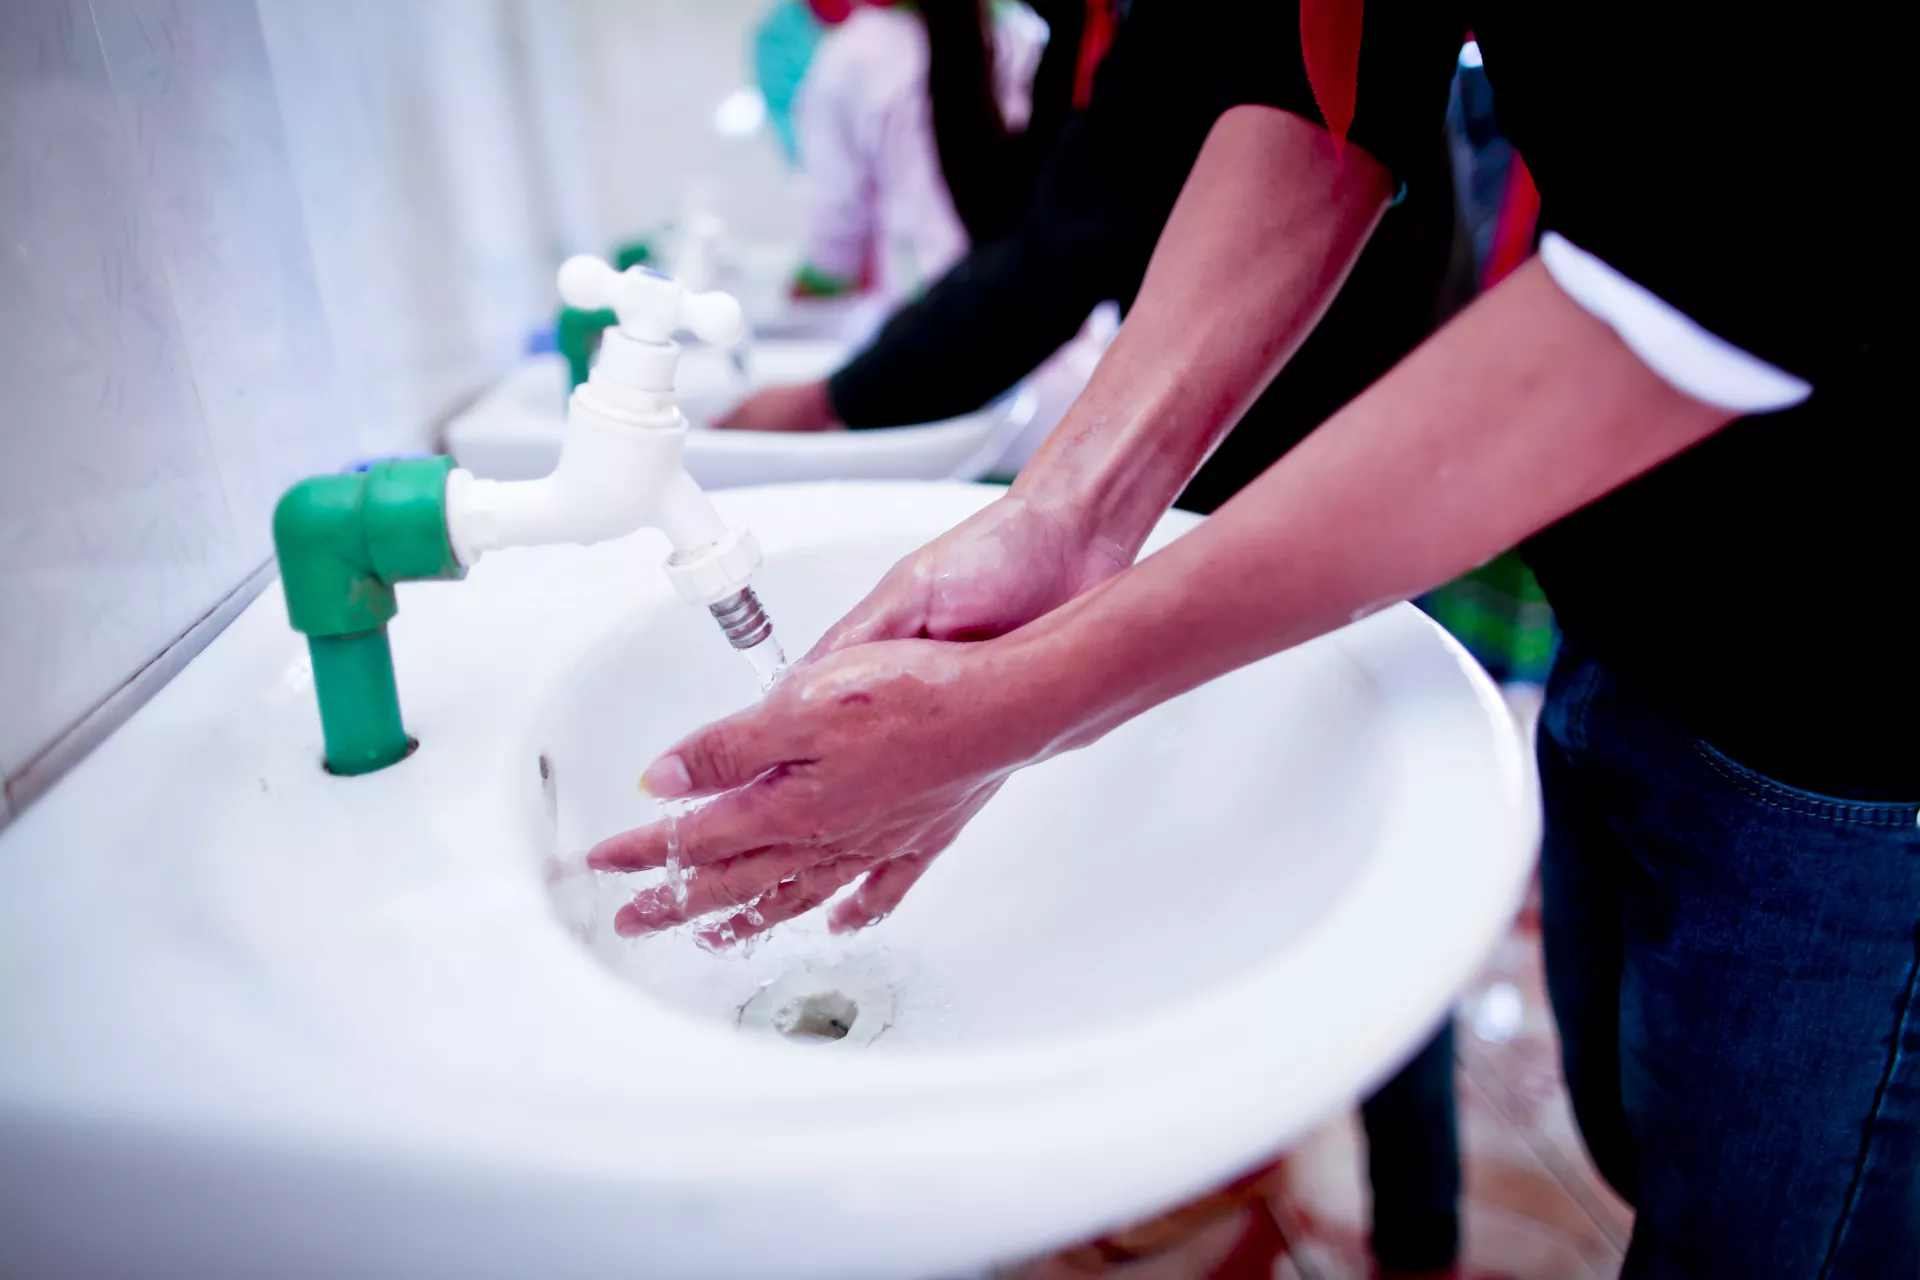 Washing hands with soap has become my new habit for Luong Gia Huy in An Giang